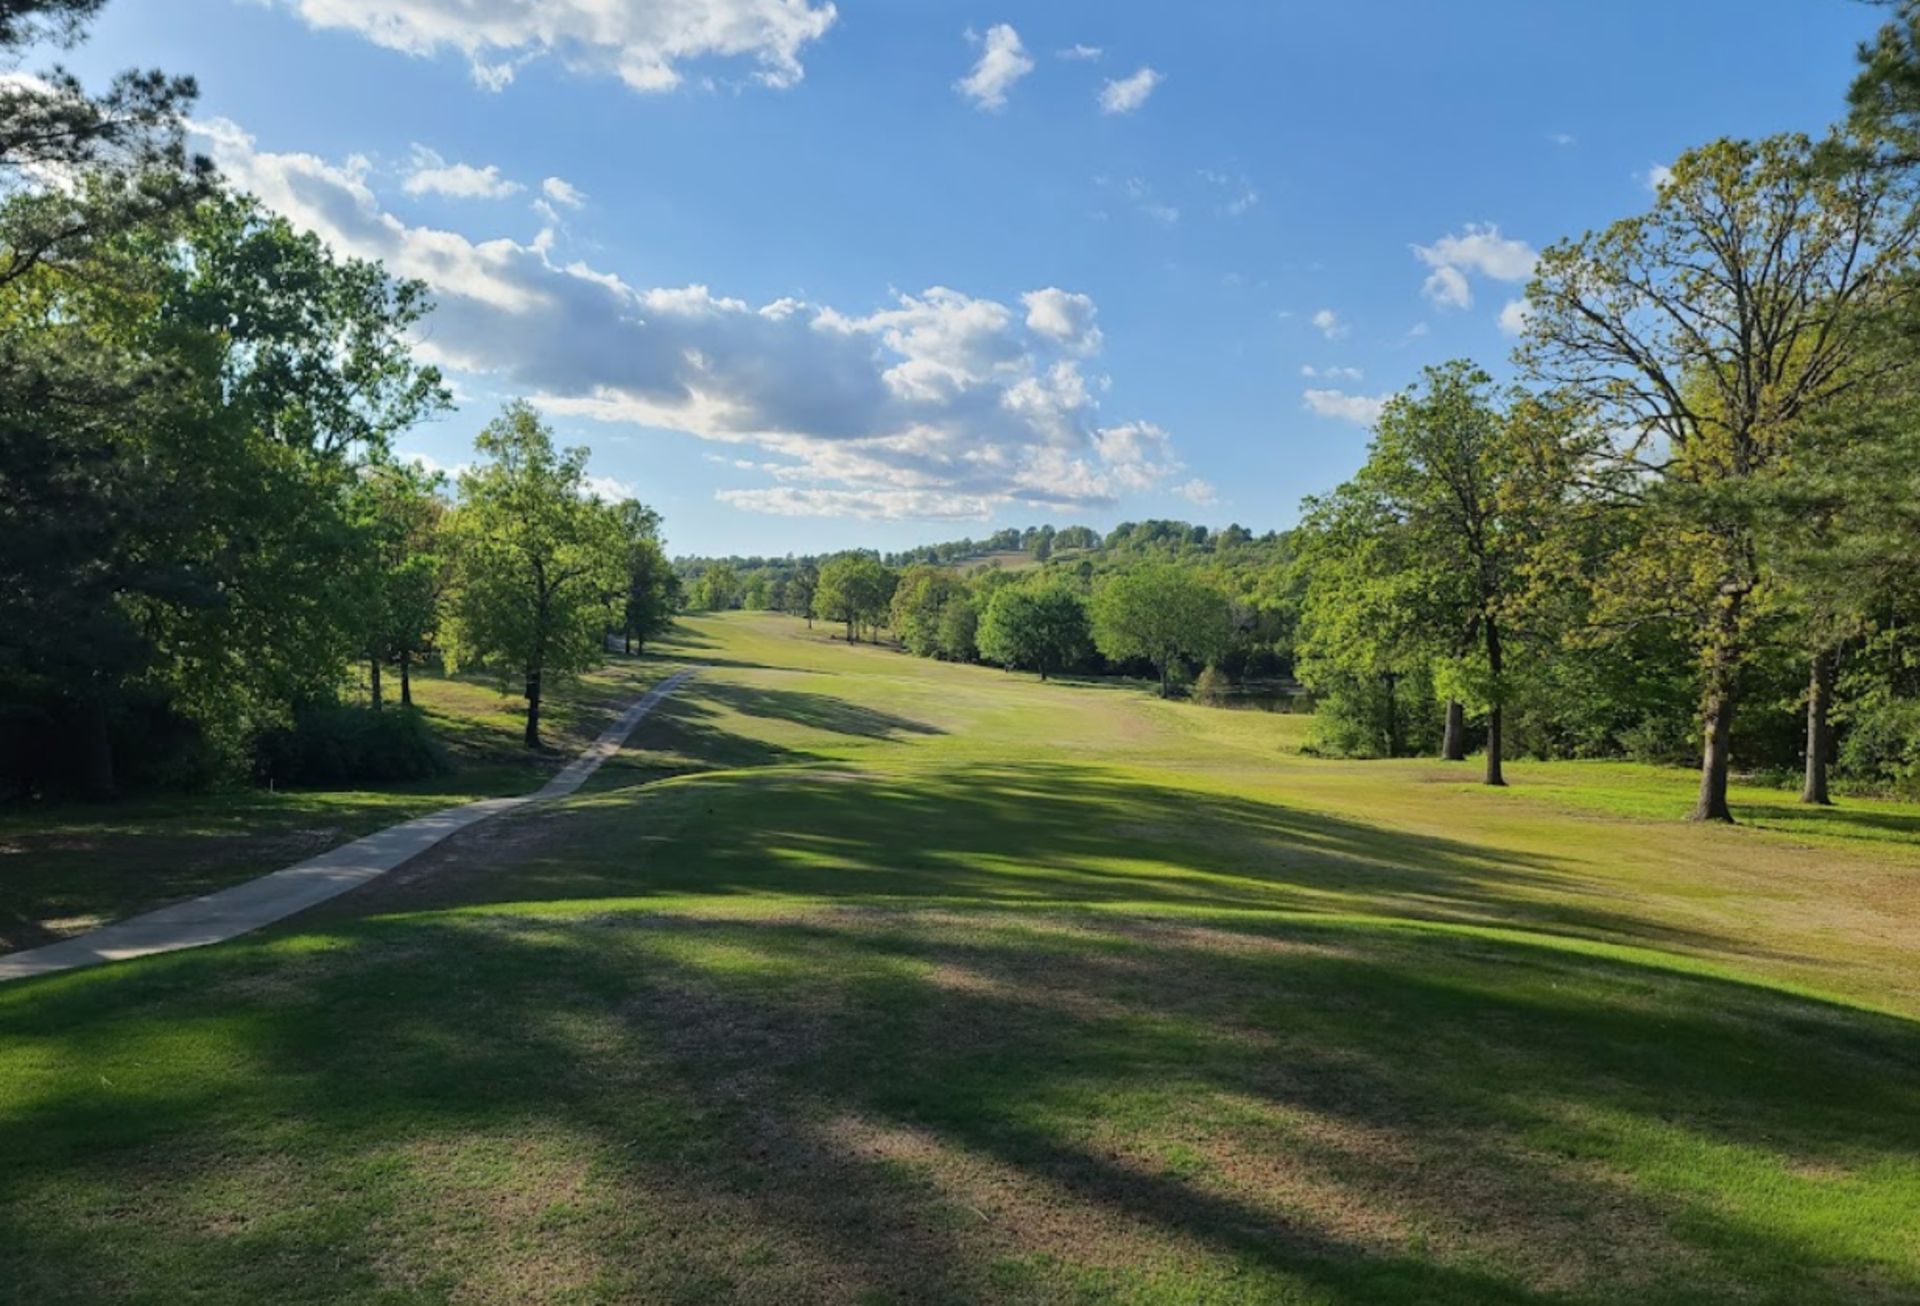 Invest in Yourself & Invest in Land with this Quarter-Acre Lot in Horseshoe Bend, Arkansas! - Image 11 of 15